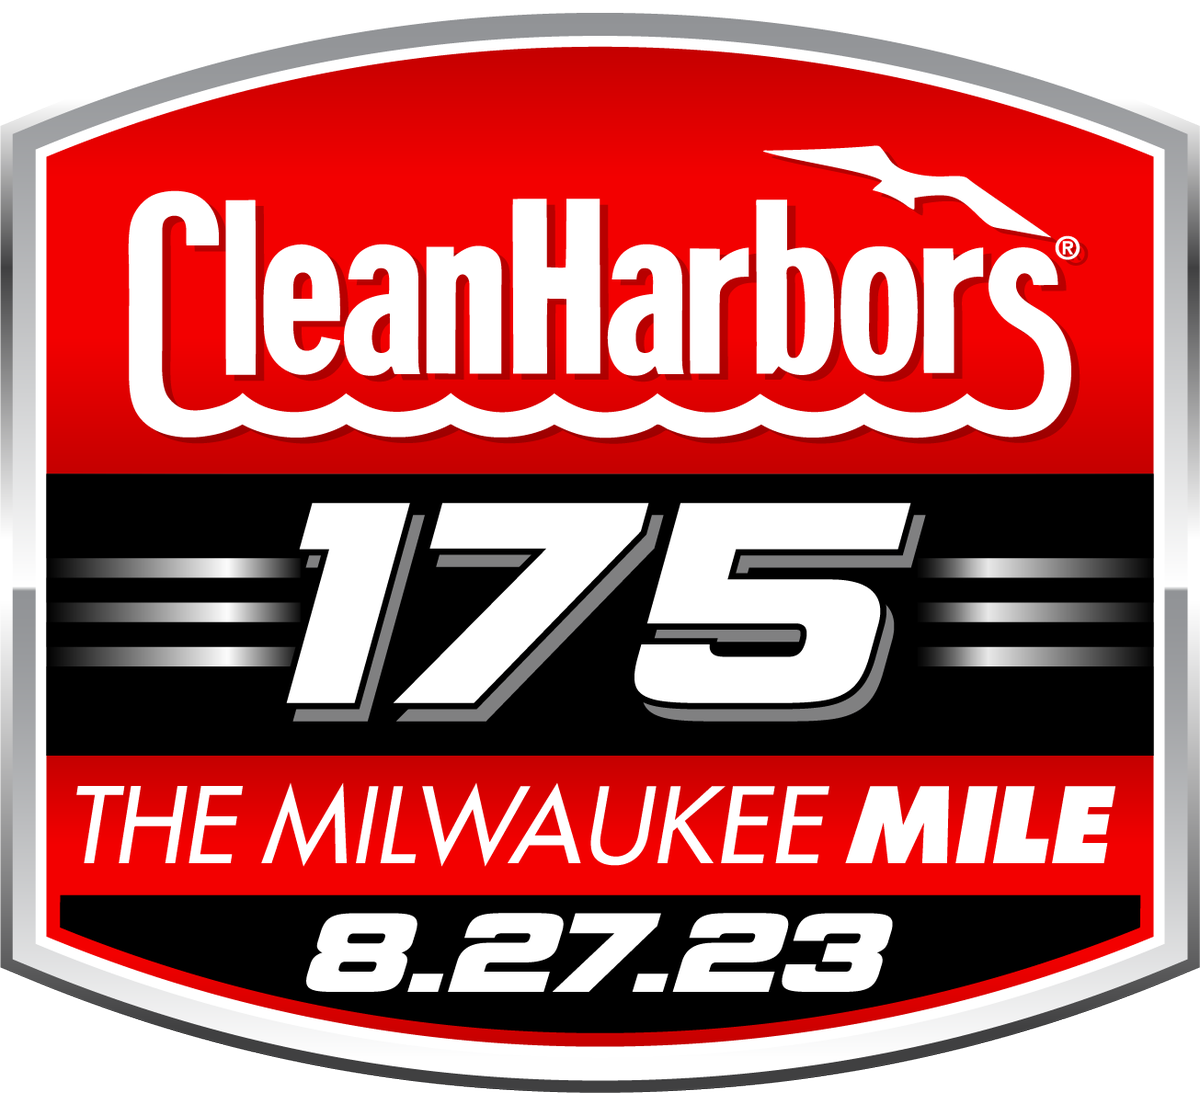 It's been a long time coming but we're helping NASCAR bring racing back to Milwaukee! The Clean Harbors 175 truck series race will run Aug. 27 from the historic Milwaukee Mile. cleanharbors.com/2023/clean-har…